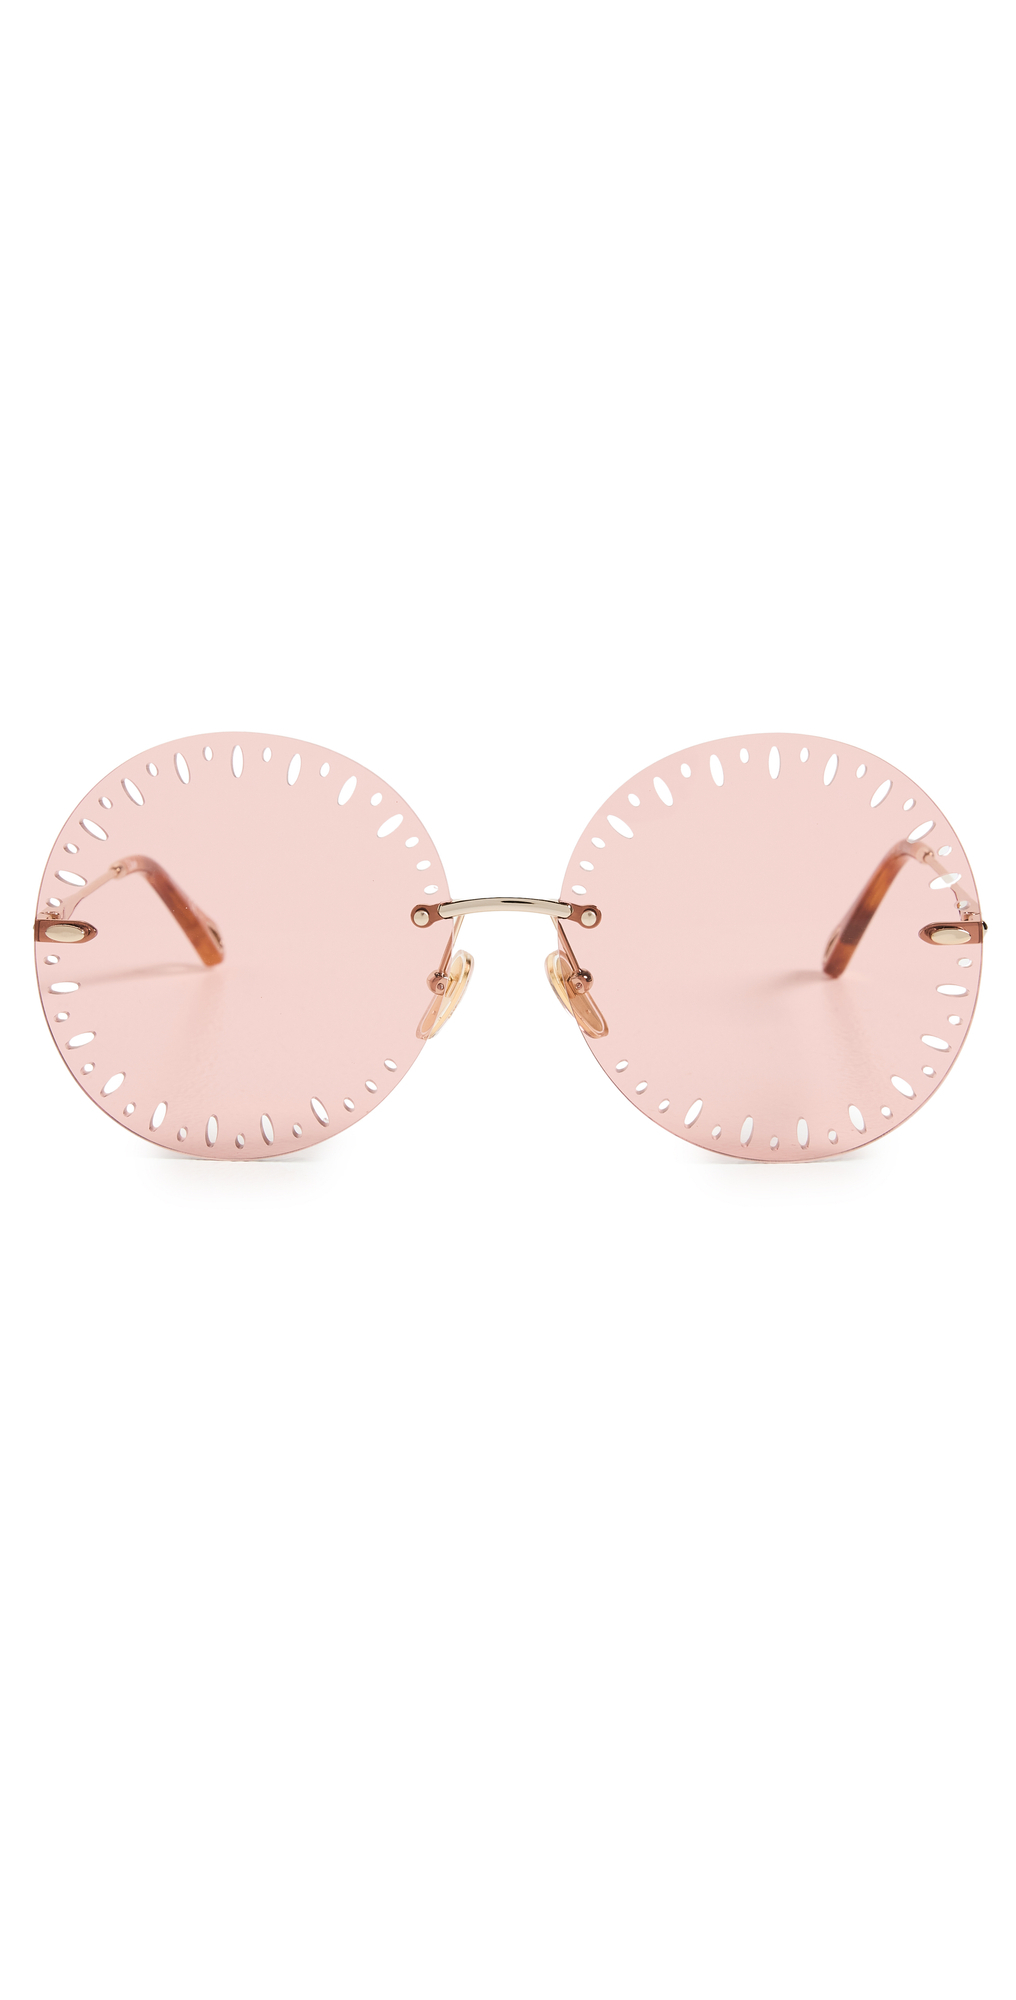 Chloe Yse Sunglasses in gold / pink